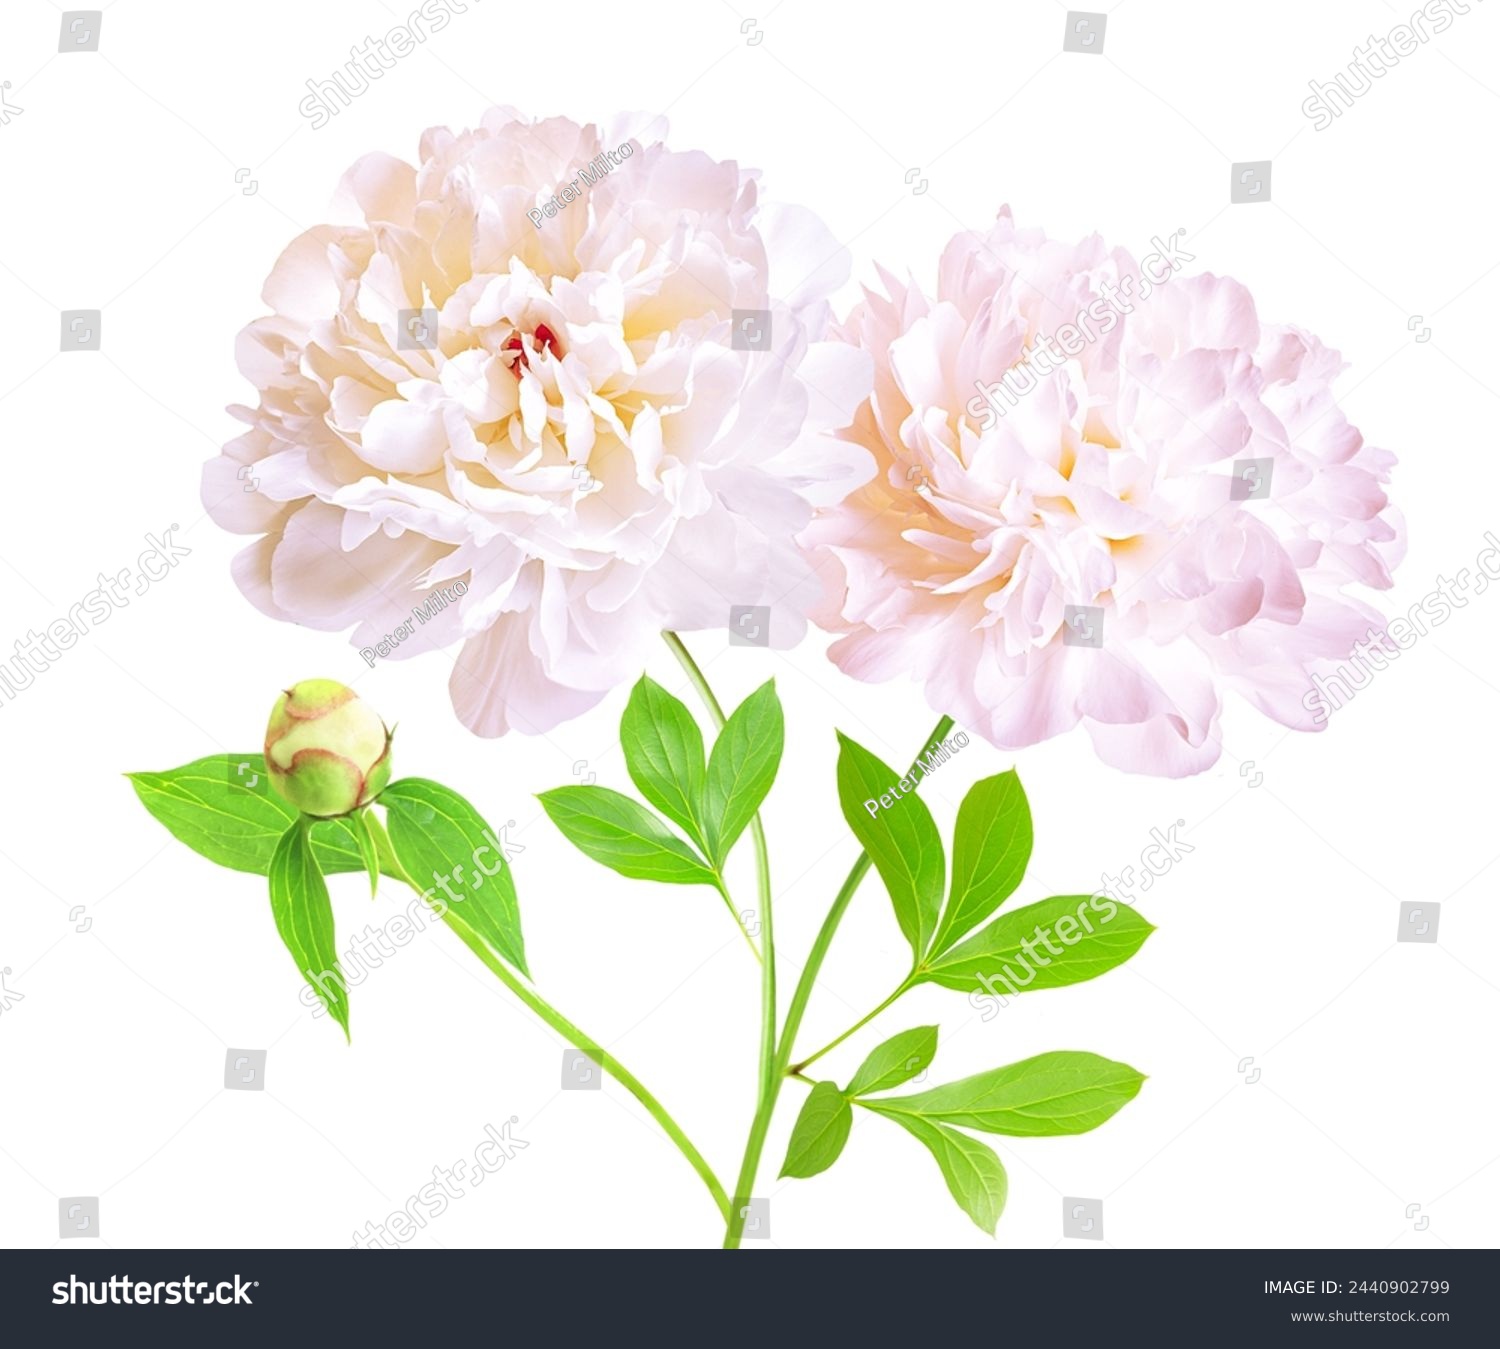 Two isolated white peony flower with stem and leaves. White peony flower isolated. Working path saved. #2440902799